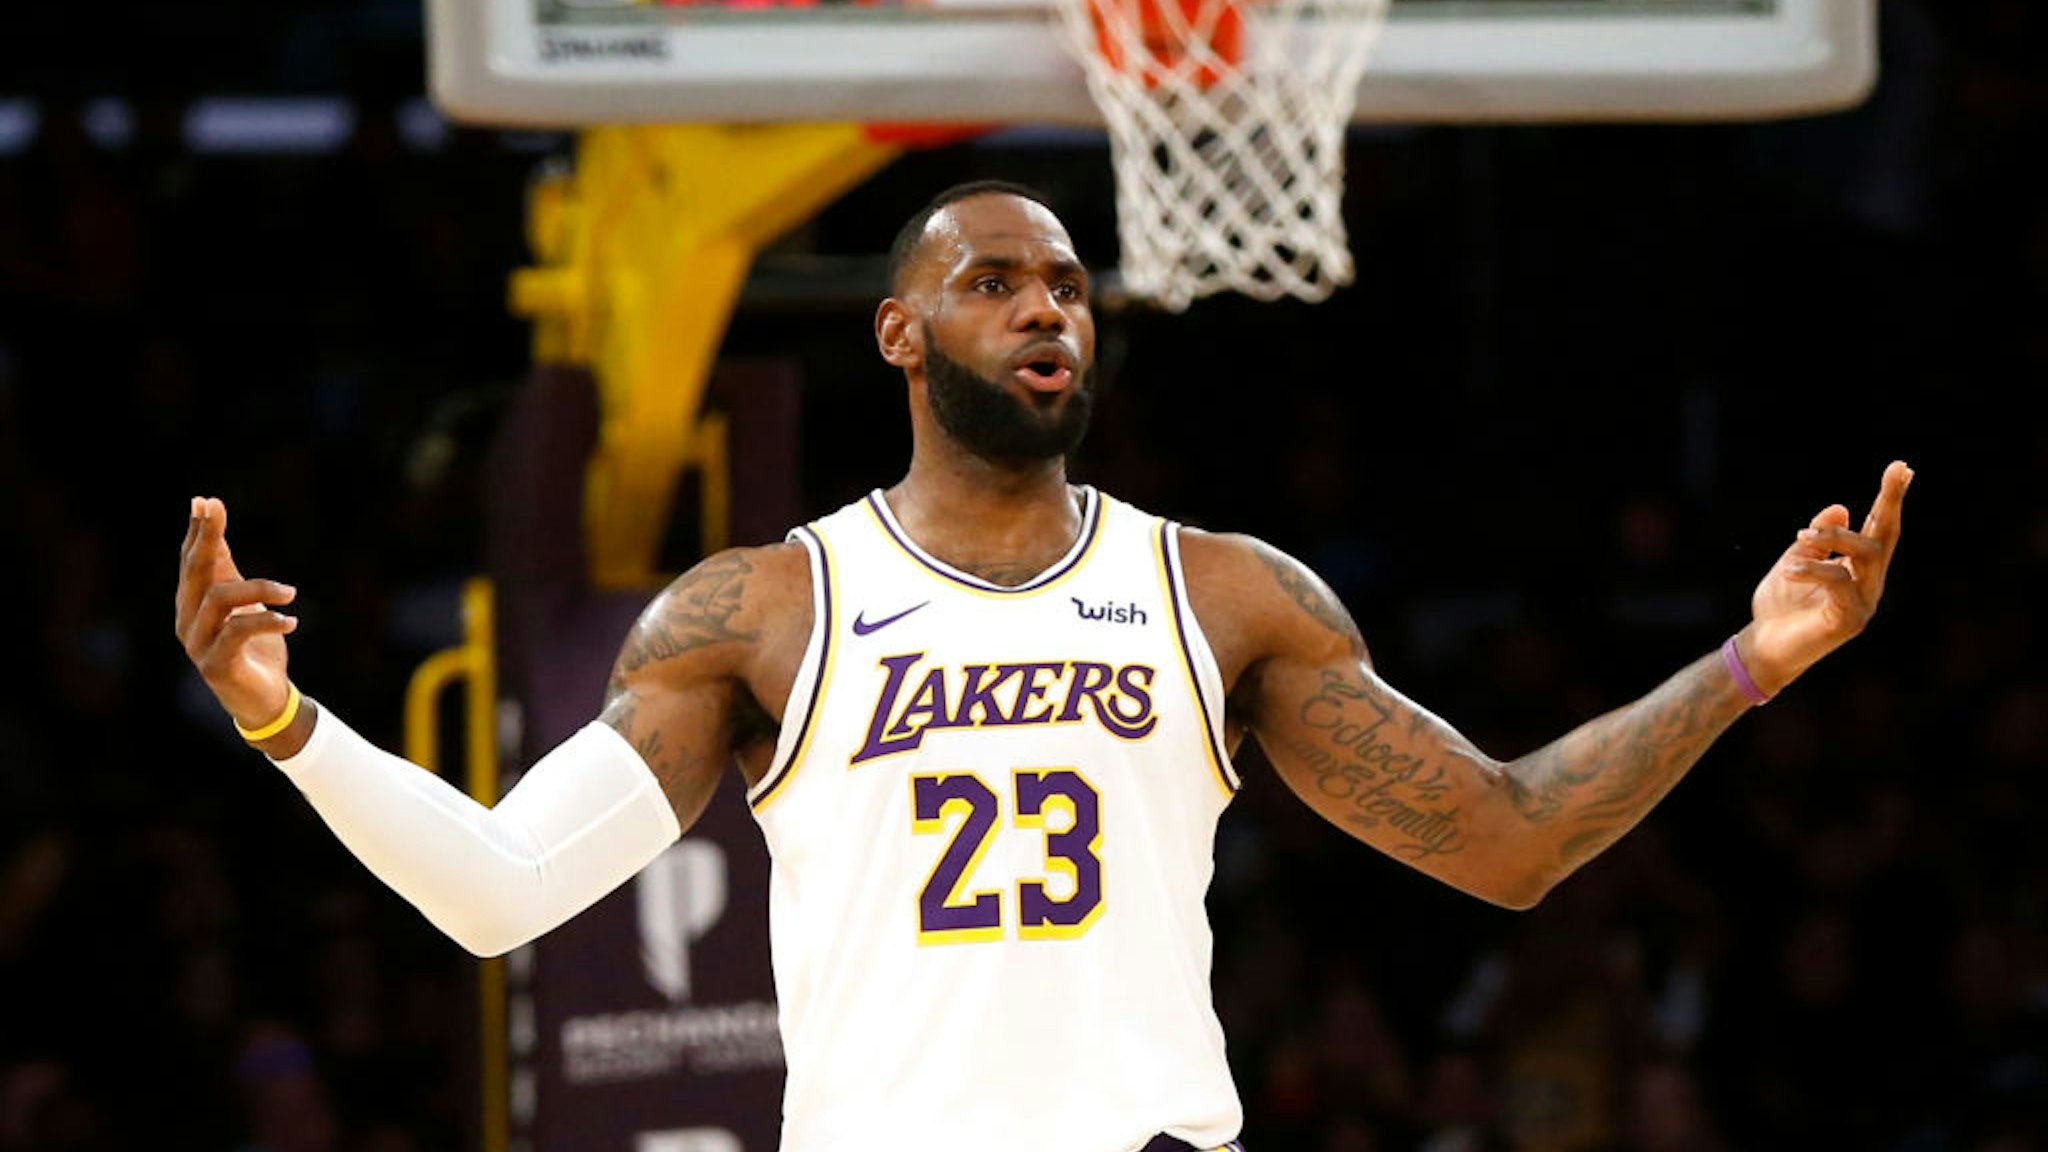 LeBron James #23 of the Los Angeles Lakers looks on during the second half against the Minnesota Timberwolves at Staples Center on December 08, 2019 in Los Angeles, California.